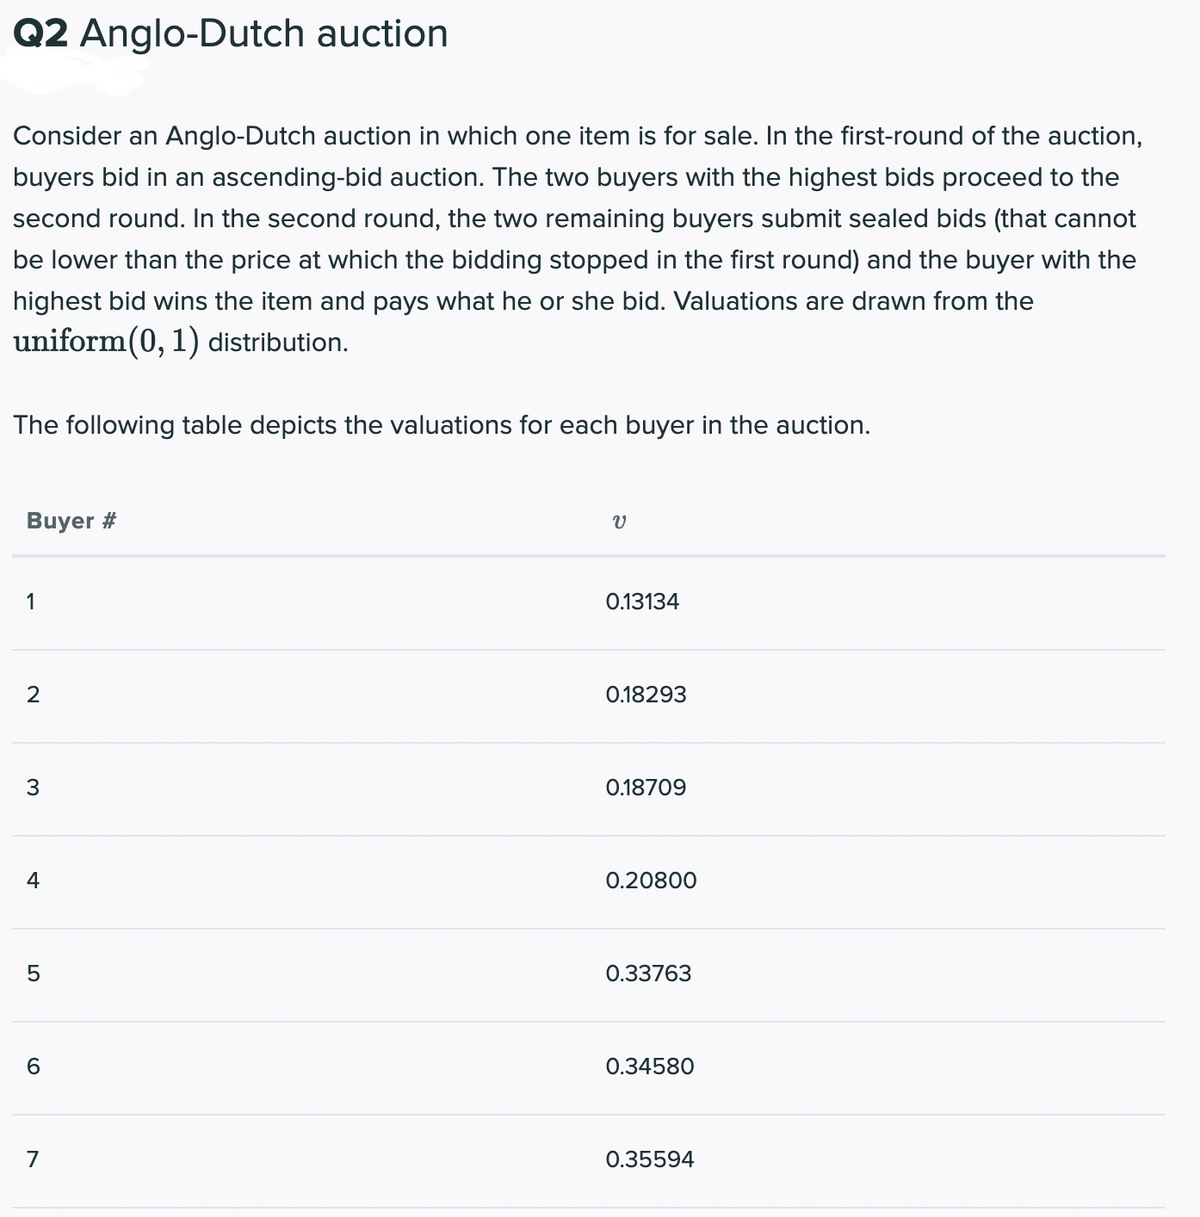 Q2 Anglo-Dutch auction
Consider an Anglo-Dutch auction in which one item is for sale. In the first-round of the auction,
buyers bid in an ascending-bid auction. The two buyers with the highest bids proceed to the
second round. In the second round, the two remaining buyers submit sealed bids (that cannot
be lower than the price at which the bidding stopped in the first round) and the buyer with the
highest bid wins the item and pays what he or she bid. Valuations are drawn from the
uniform(0, 1) distribution.
The following table depicts the valuations for each buyer in the auction.
Buyer #
1
0.13134
0.18293
0.18709
4
0.20800
0.33763
6.
0.34580
7
0.35594
